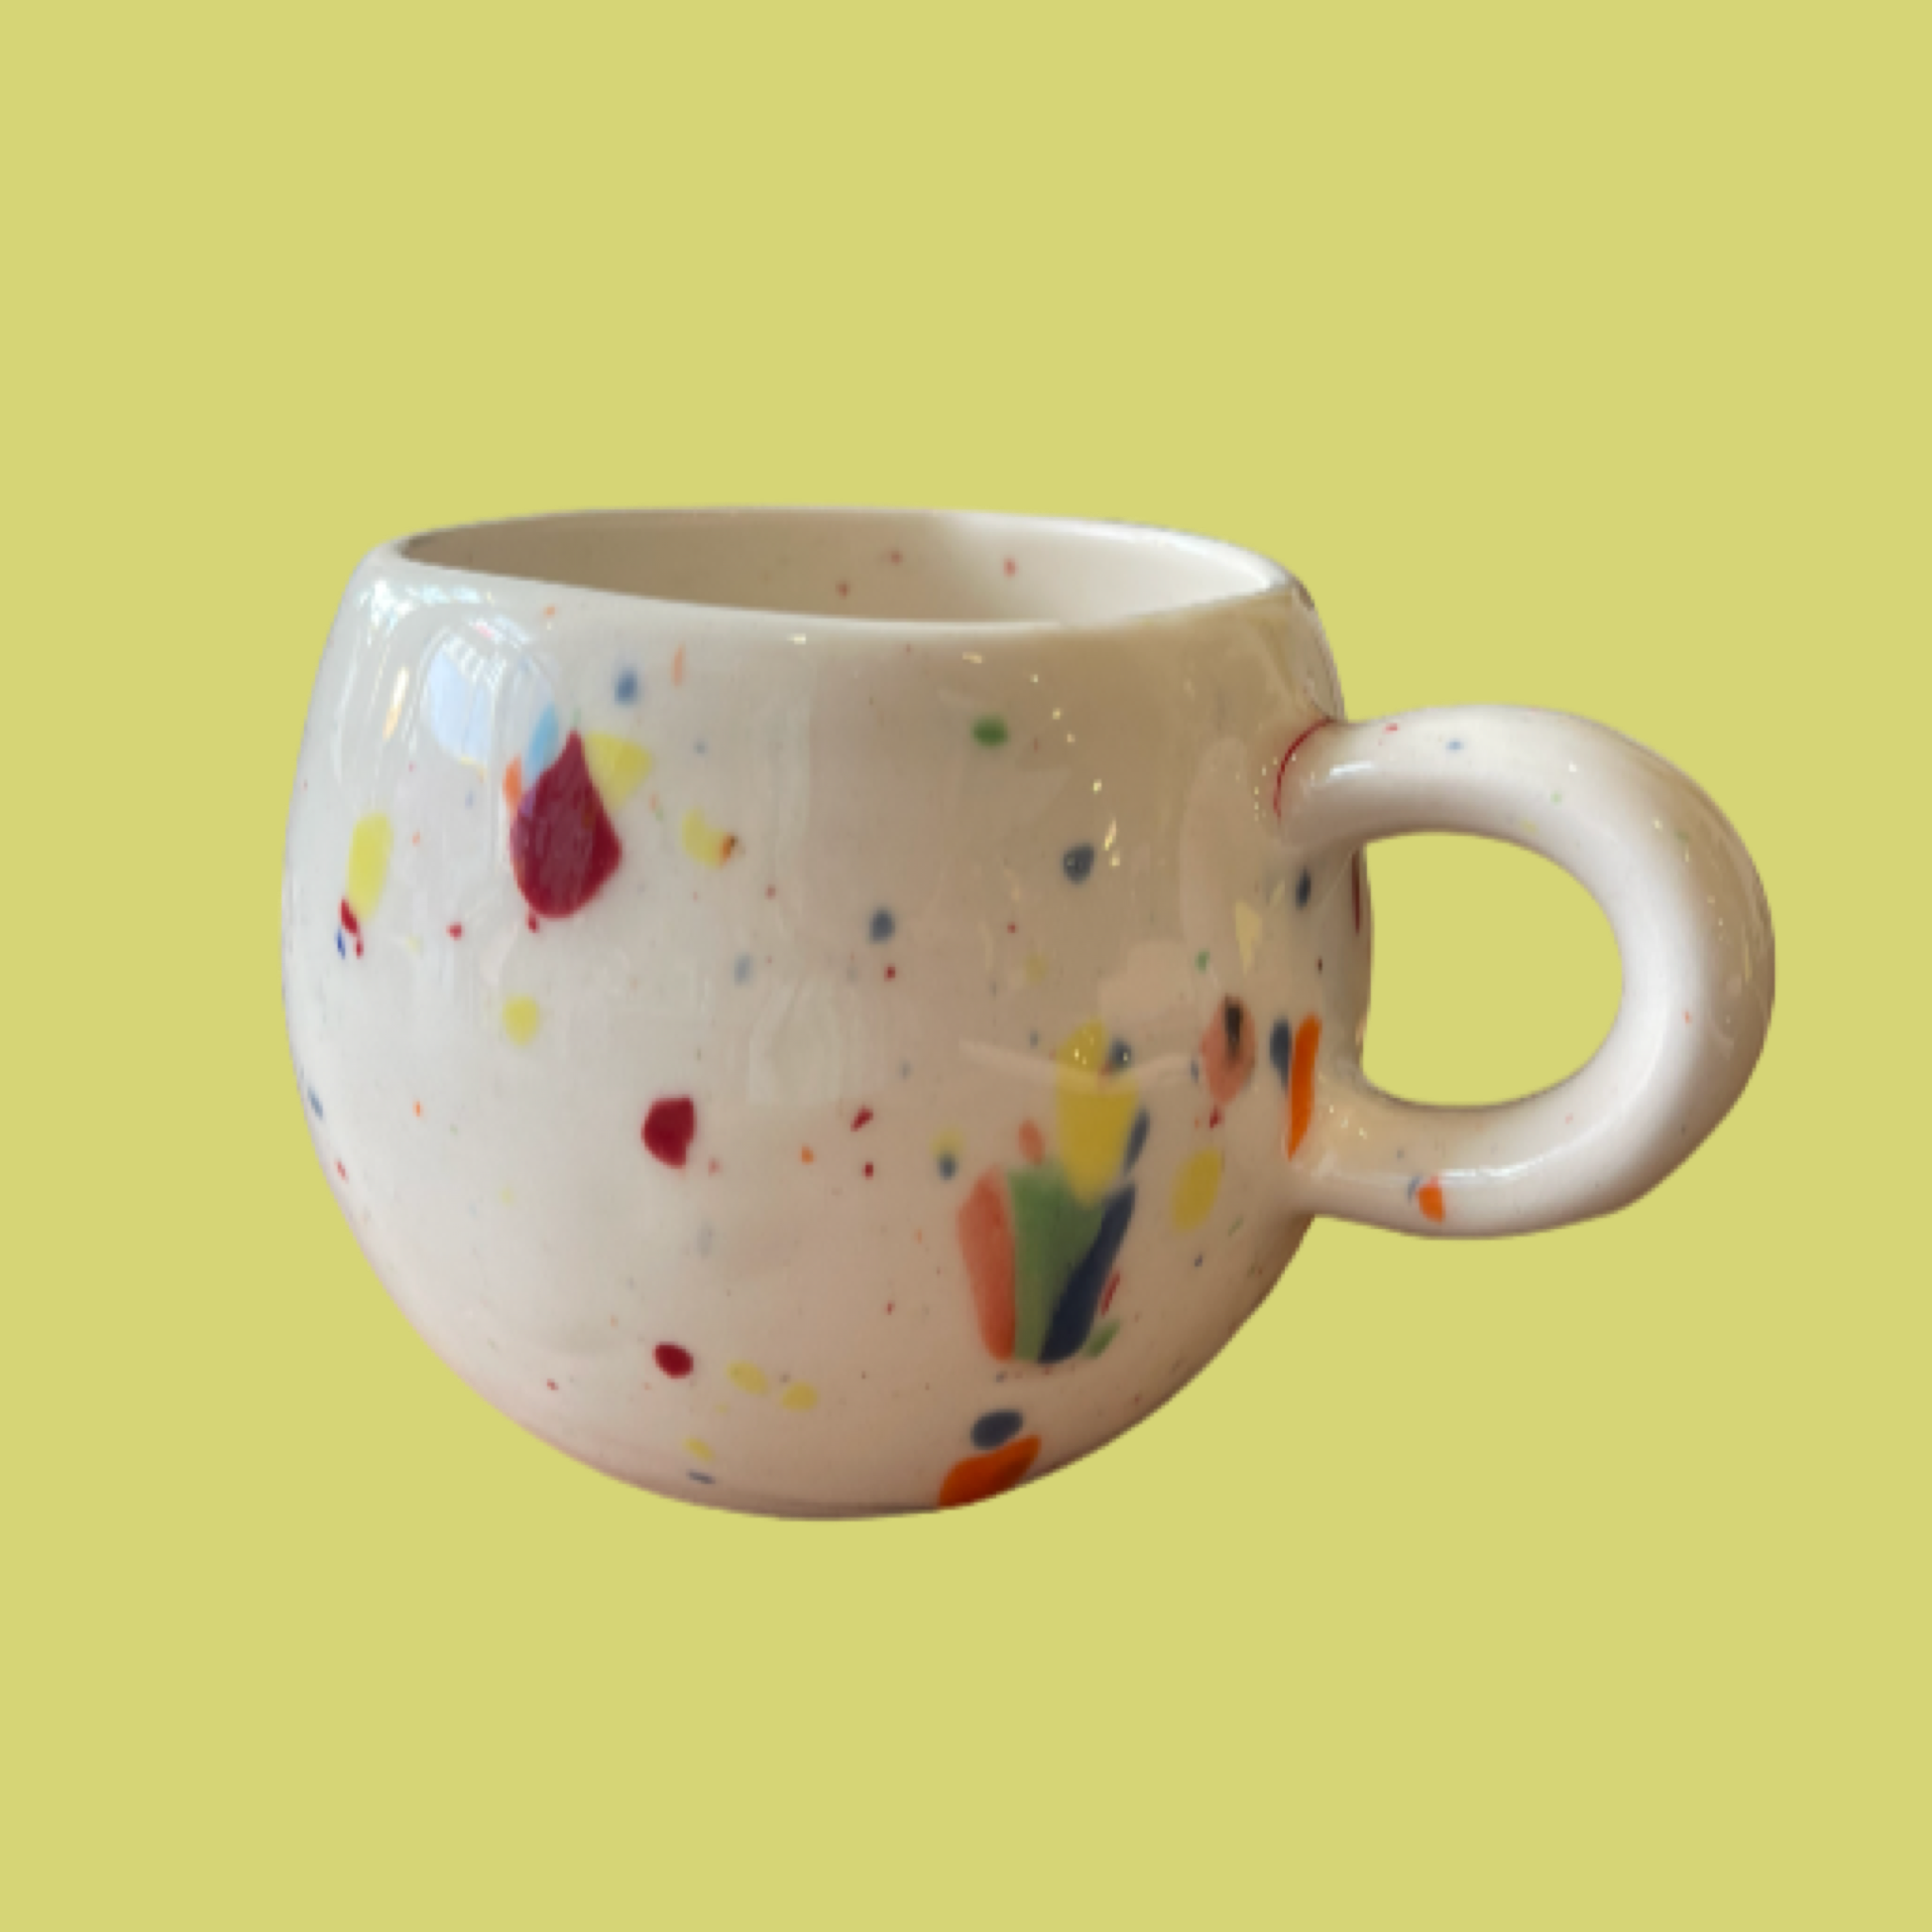 CARNIVAL ROUND MUG by Suuuper